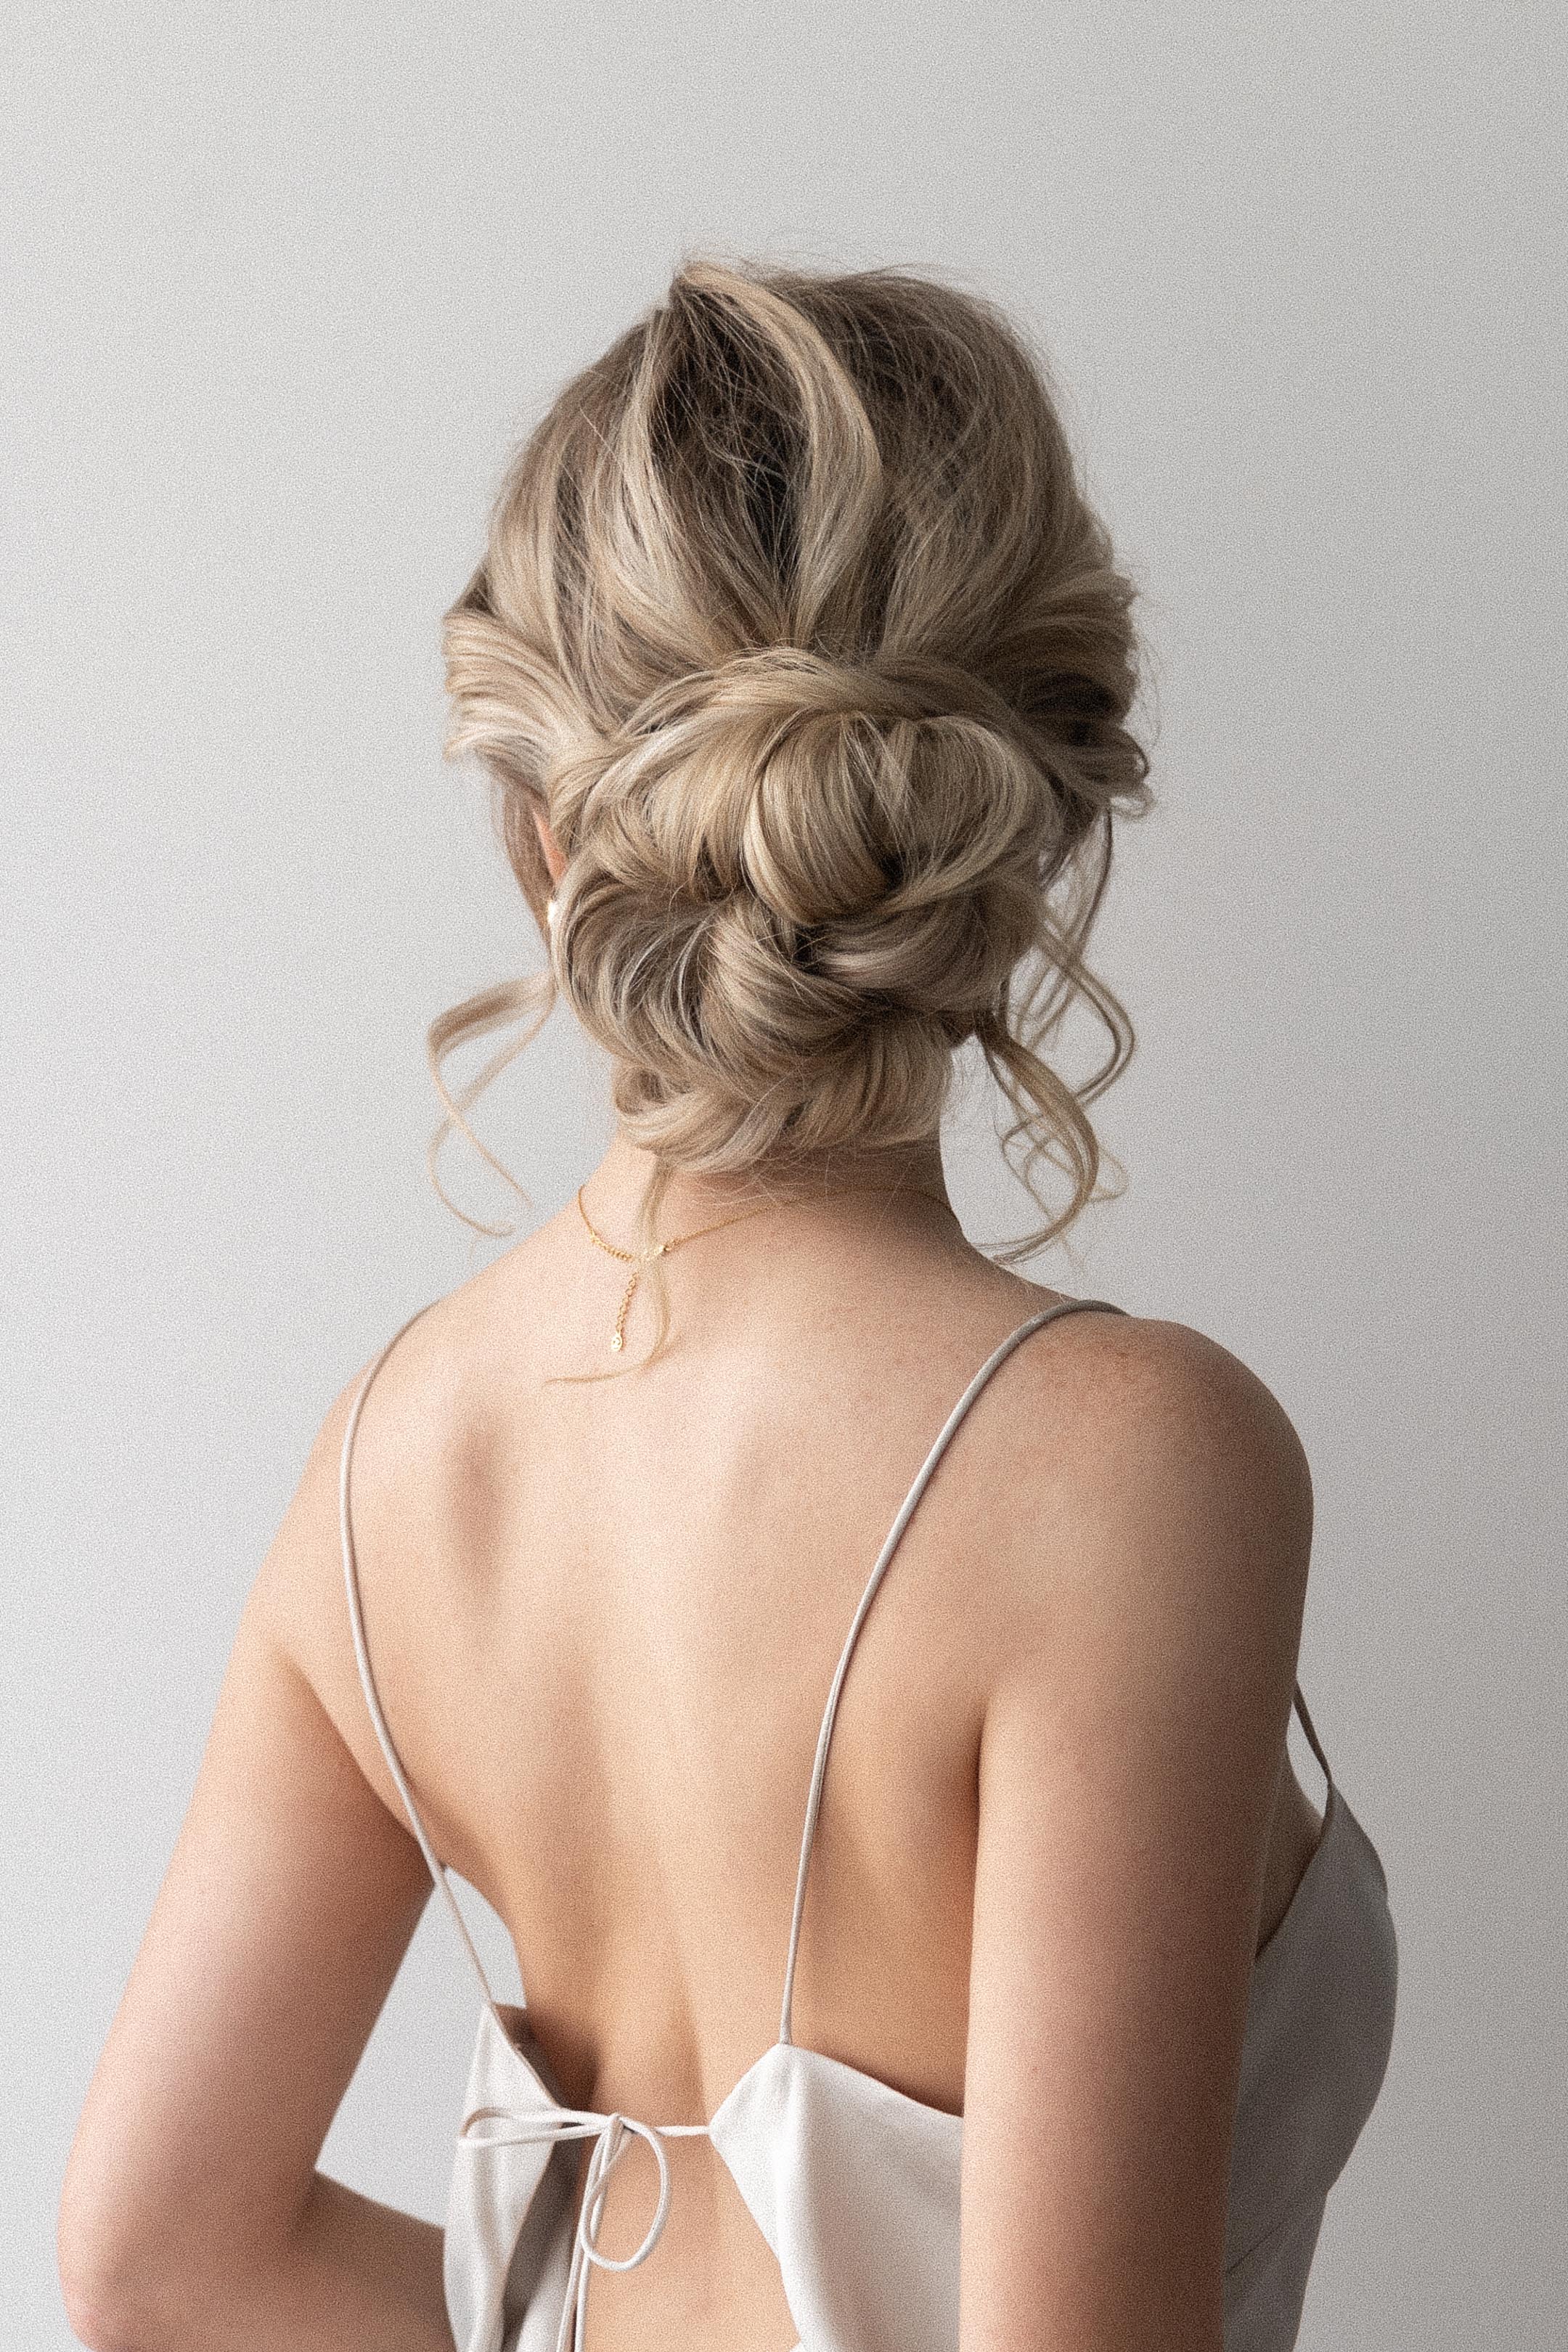 Messy Bun How To: Getting the Look Just Right